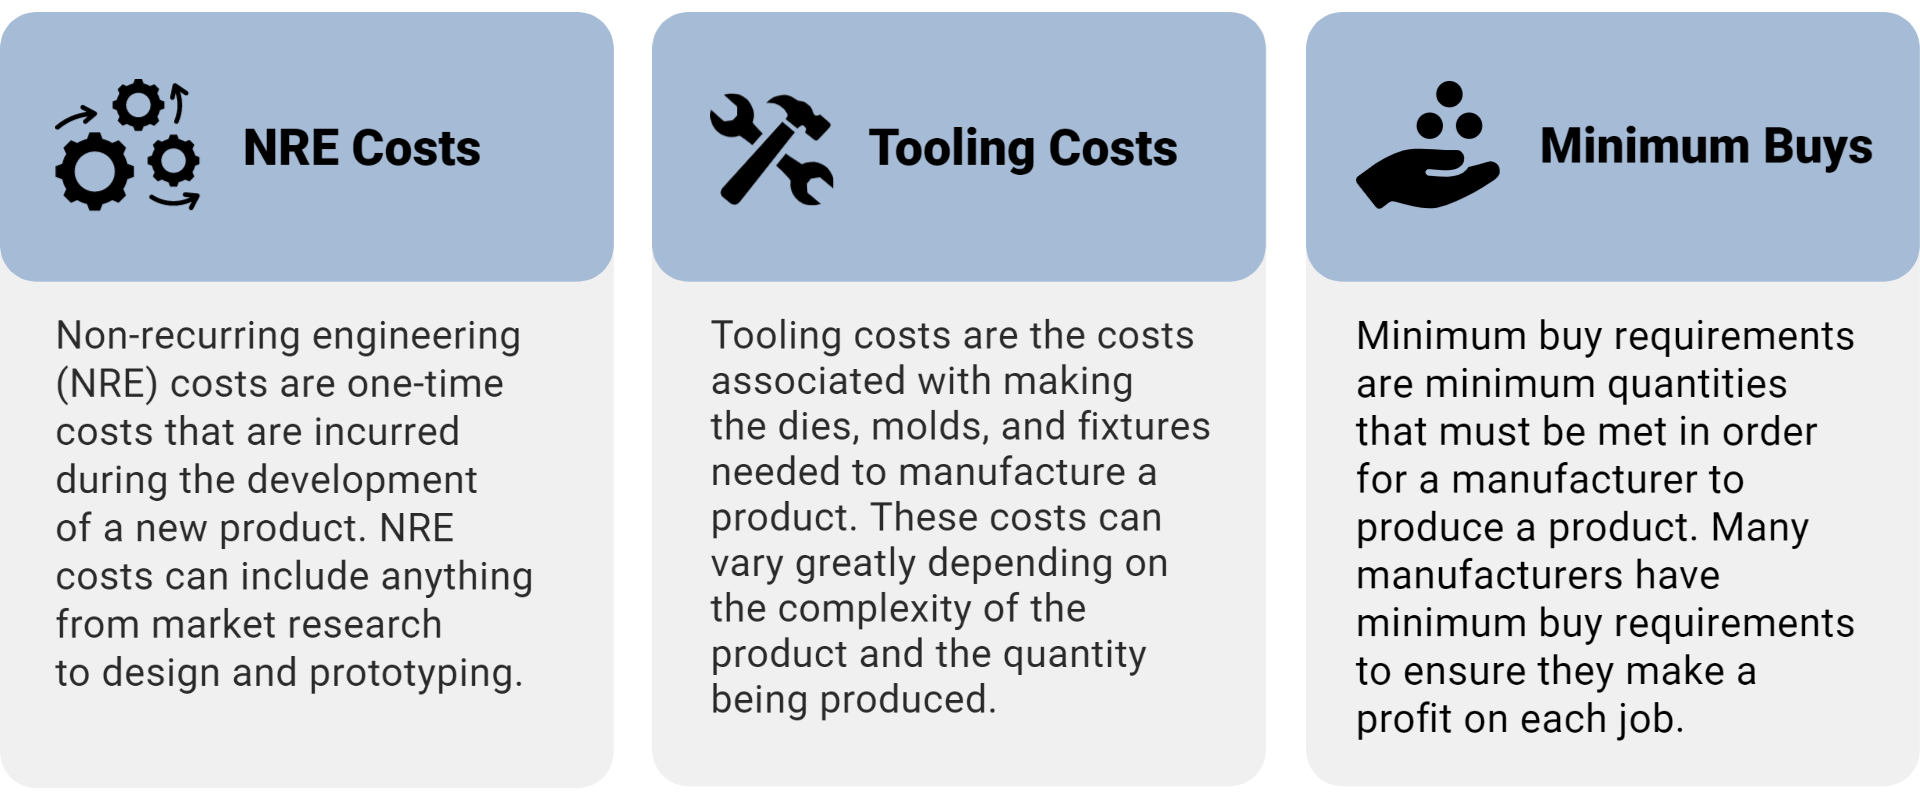 Three contract manufacturing costs involved when building machinery or equipment